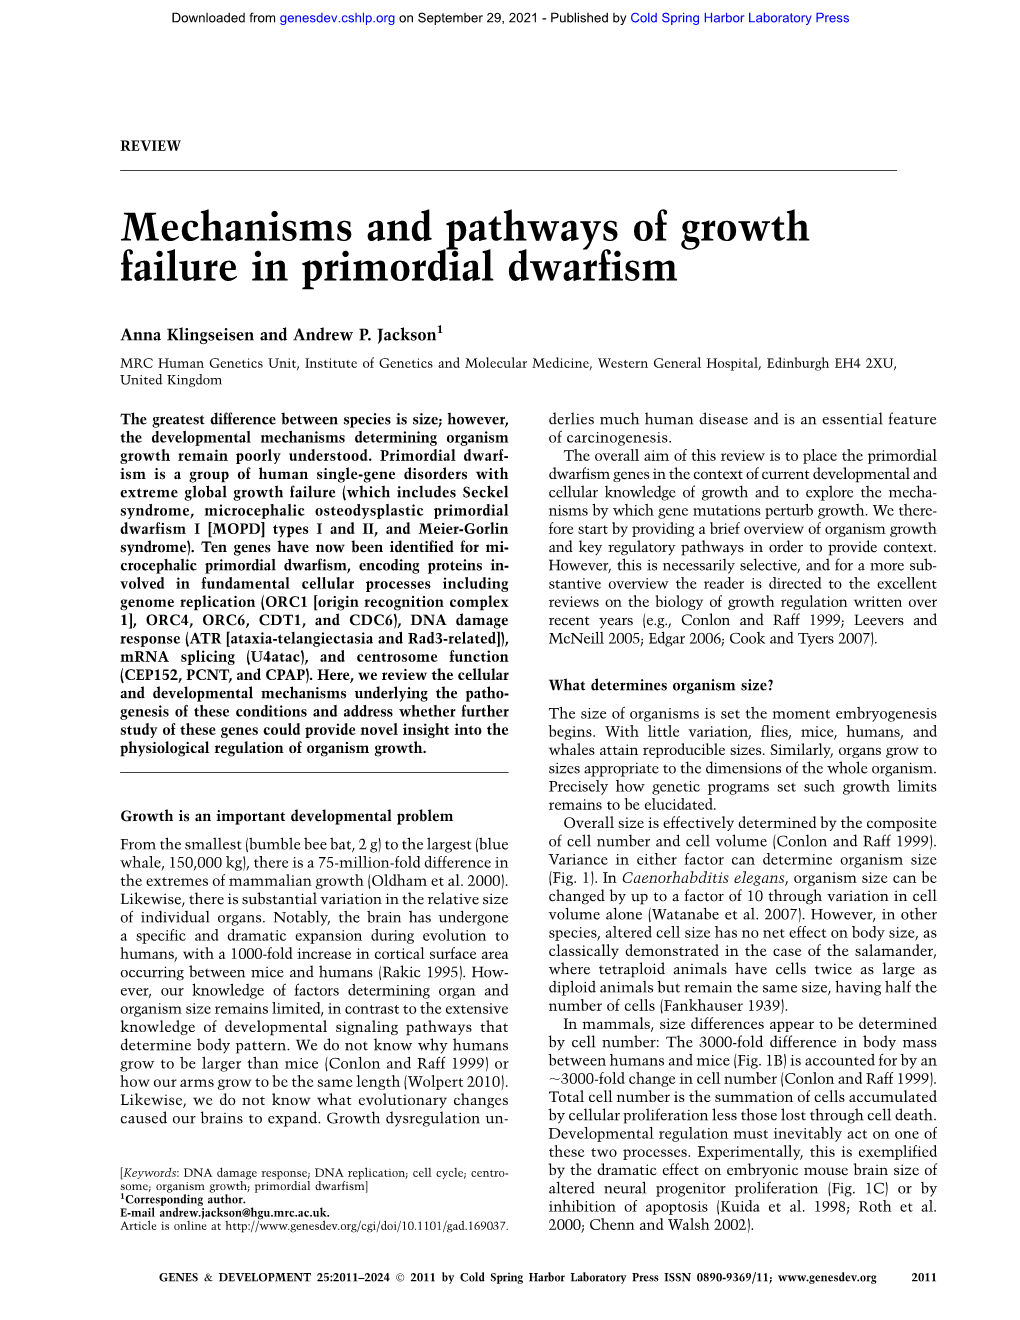 Mechanisms and Pathways of Growth Failure in Primordial Dwarfism